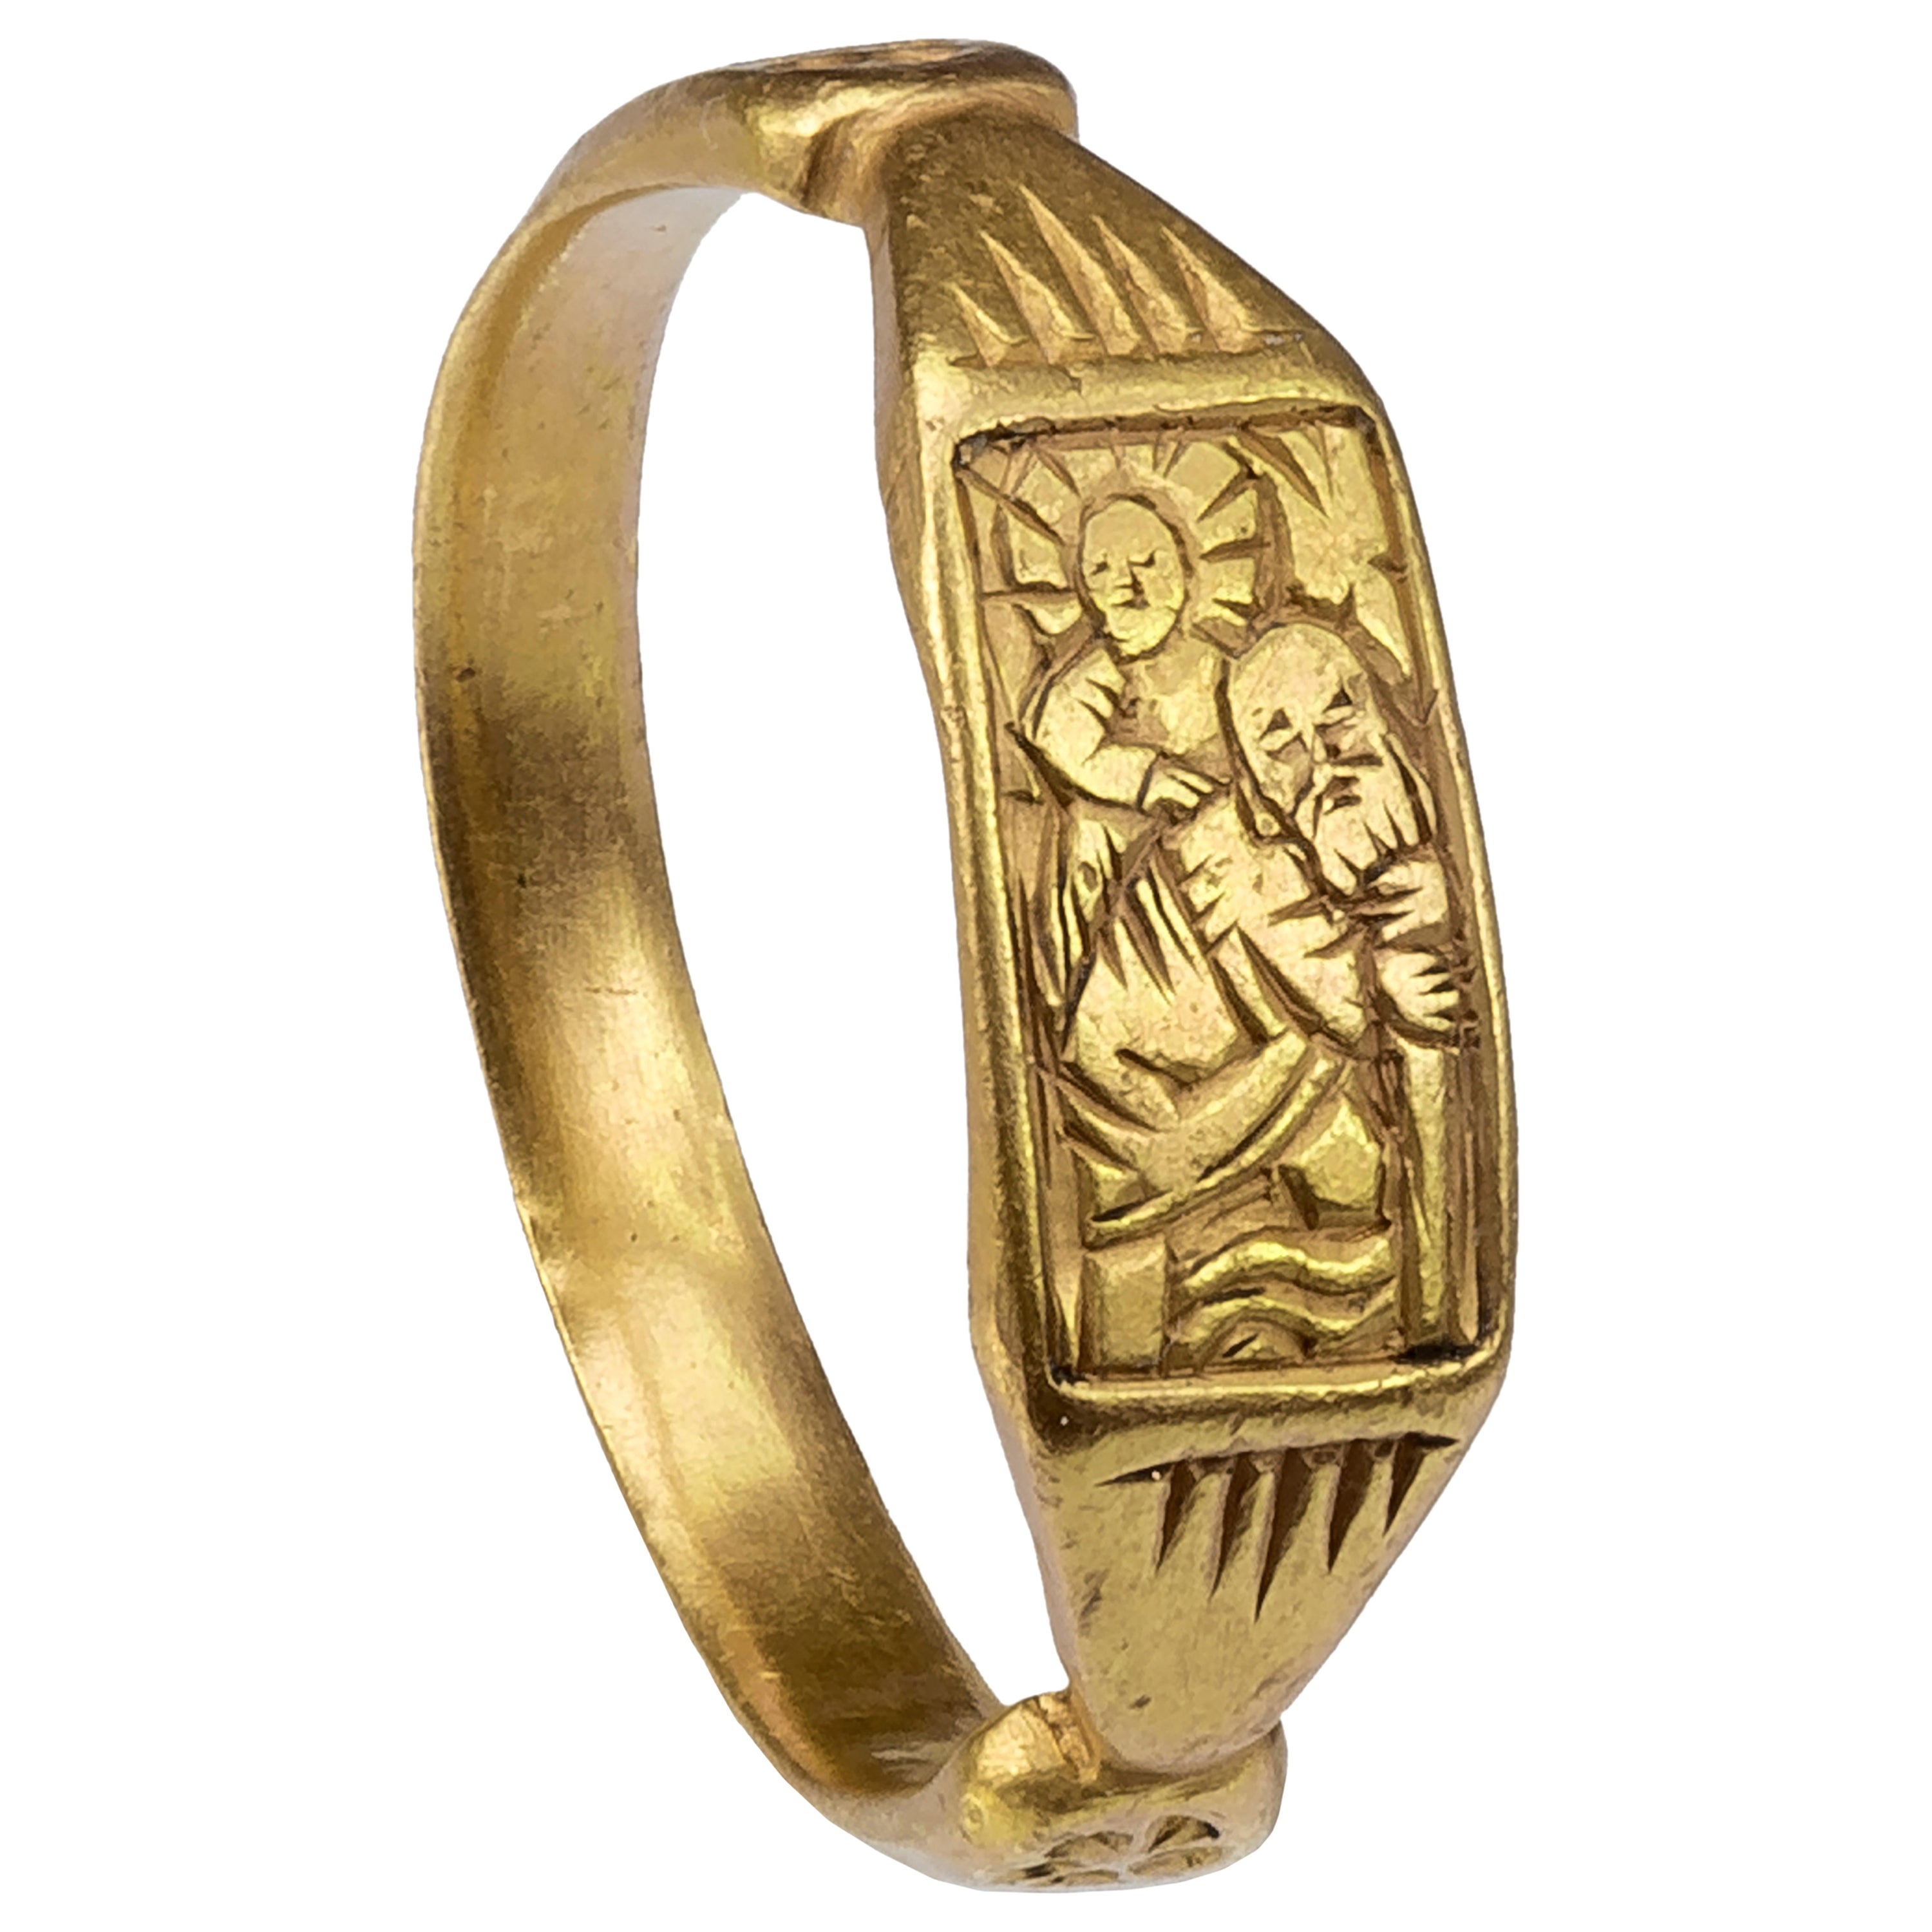 Gold Antique Ring from the Middle Ages Depicting Saint Christopher and Christ